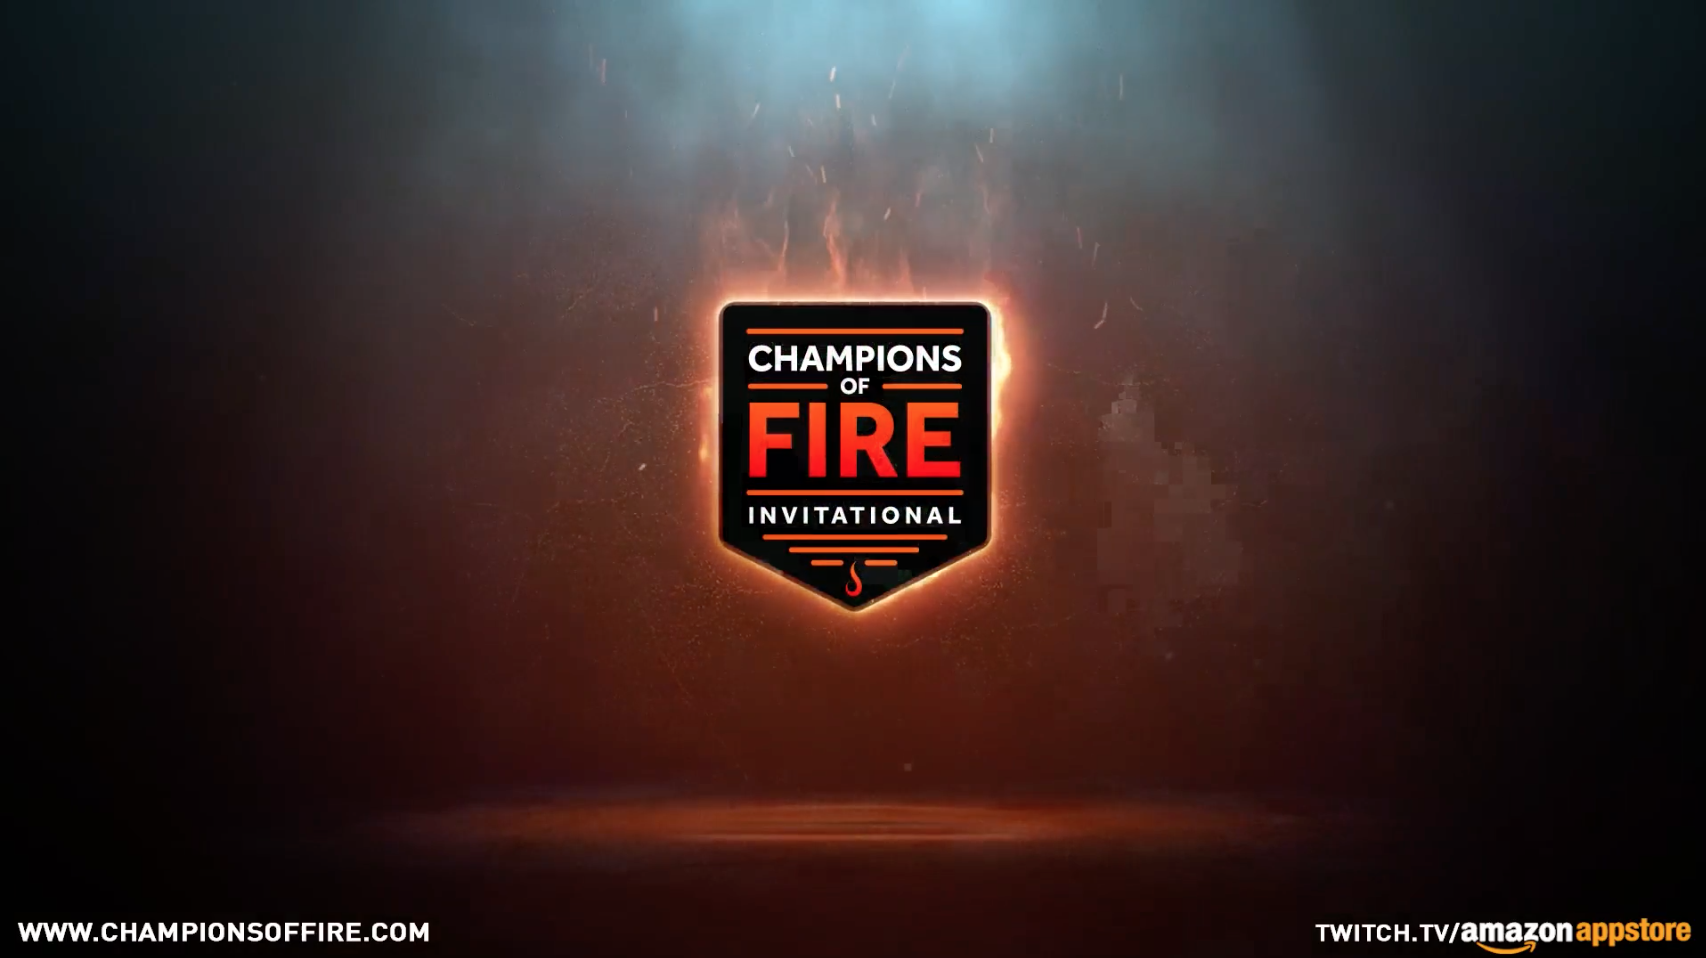 Amazon's 'Champions of Fire Invitational' Is an eSports Event for Casual Gamers, Featuring 'Flappy Bird', 'Pac-Man 256' and More From December 2nd